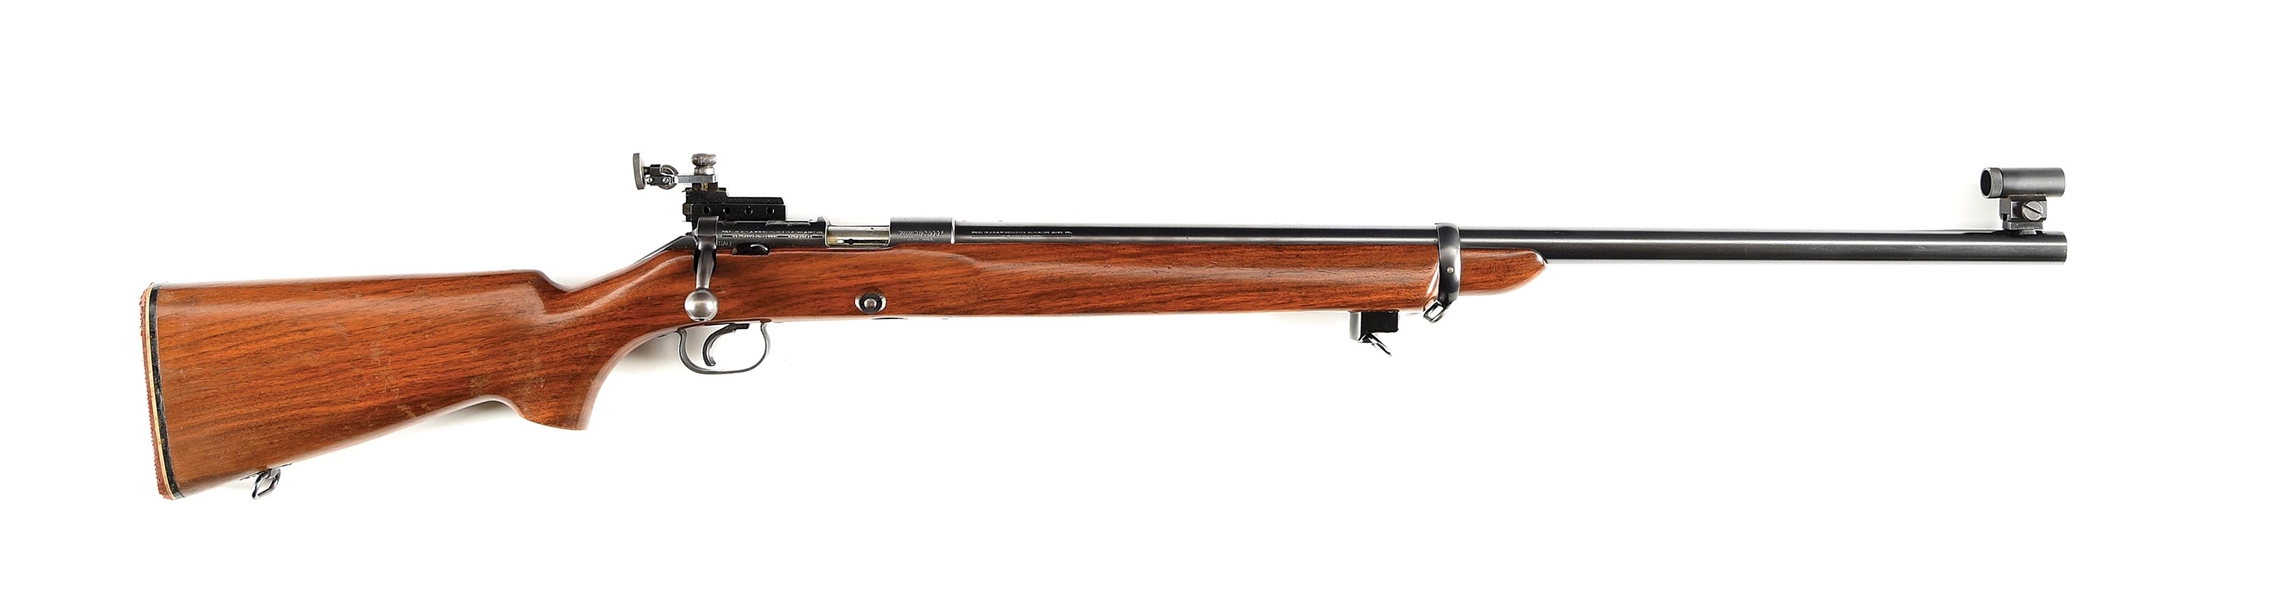 (C) WINCHESTER MODEL 52 BOLT ACTION TARGET RIFLE.